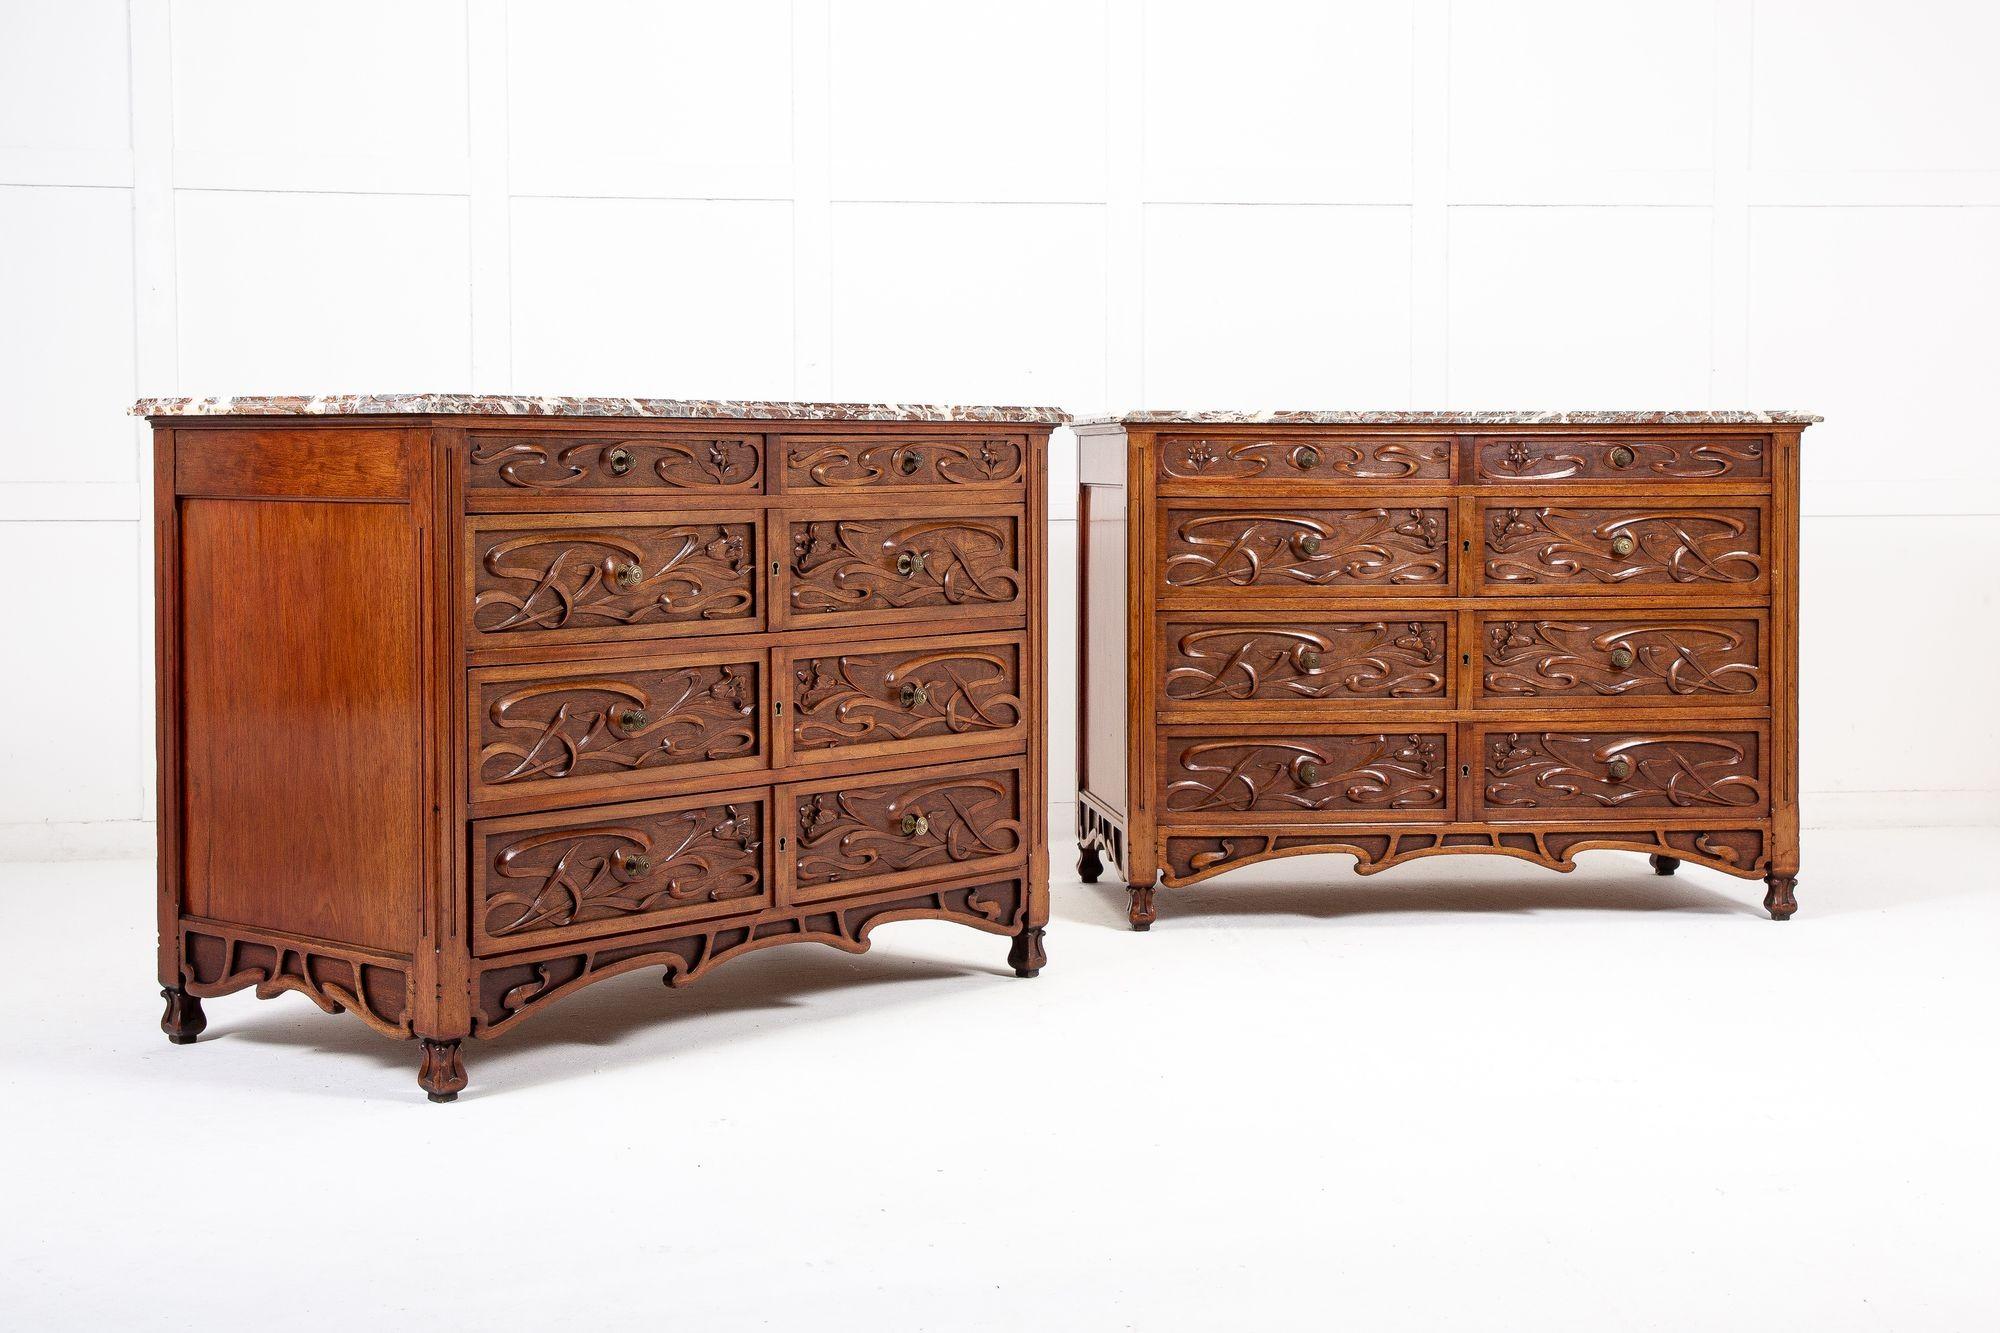 A pair of superbly carved Bruxelles chests of good scale and color, with original marble tops, having five drawers (two narrow upper drawers and three larger drawers below) and featuring flowing reed and flower fin-de-siecle carvings to drawer